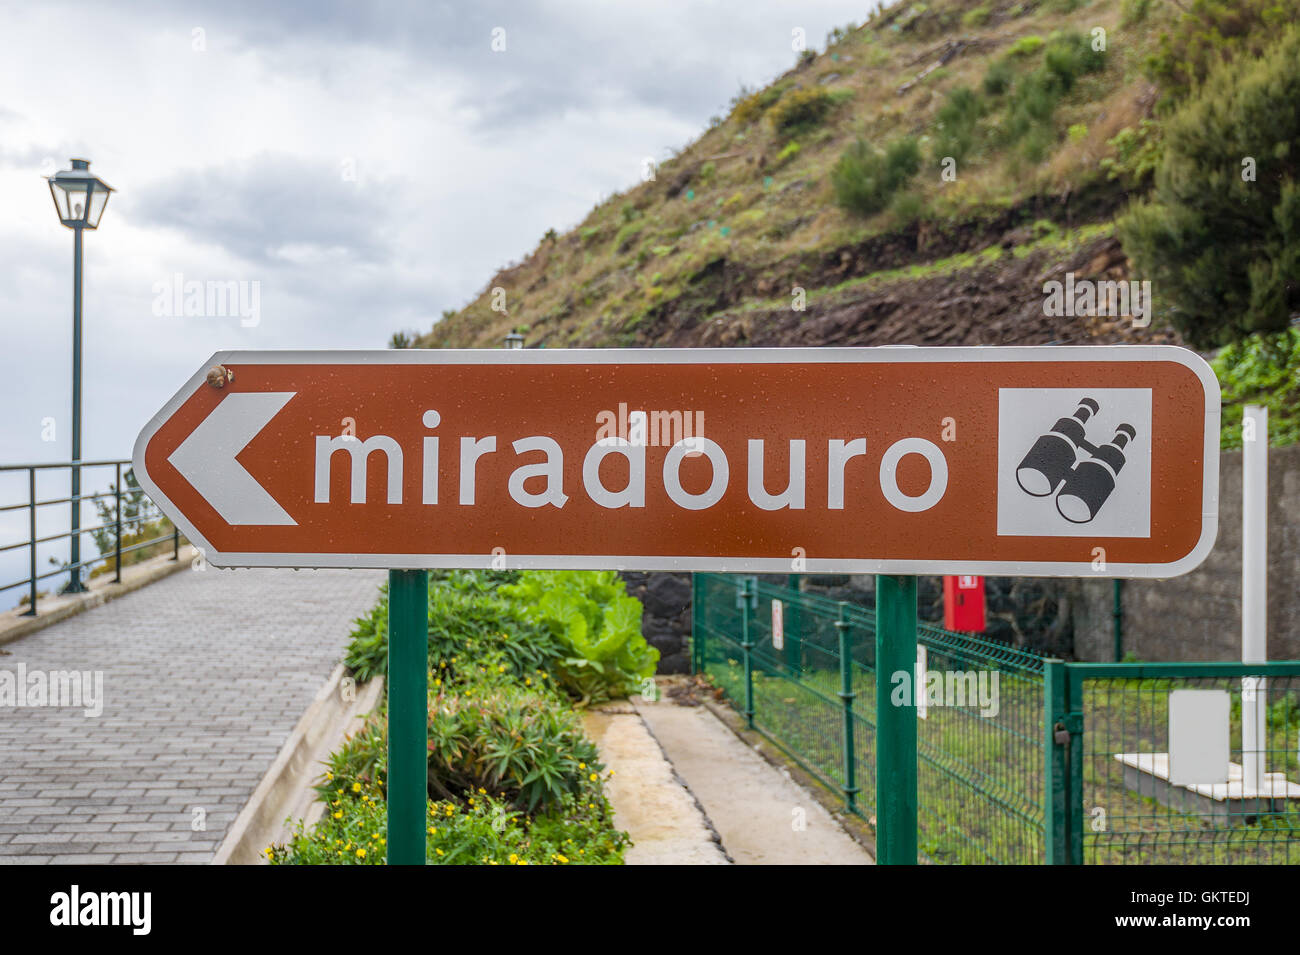 Miradouro sign means lookout or sightseeing place in Portugal. Stock Photo